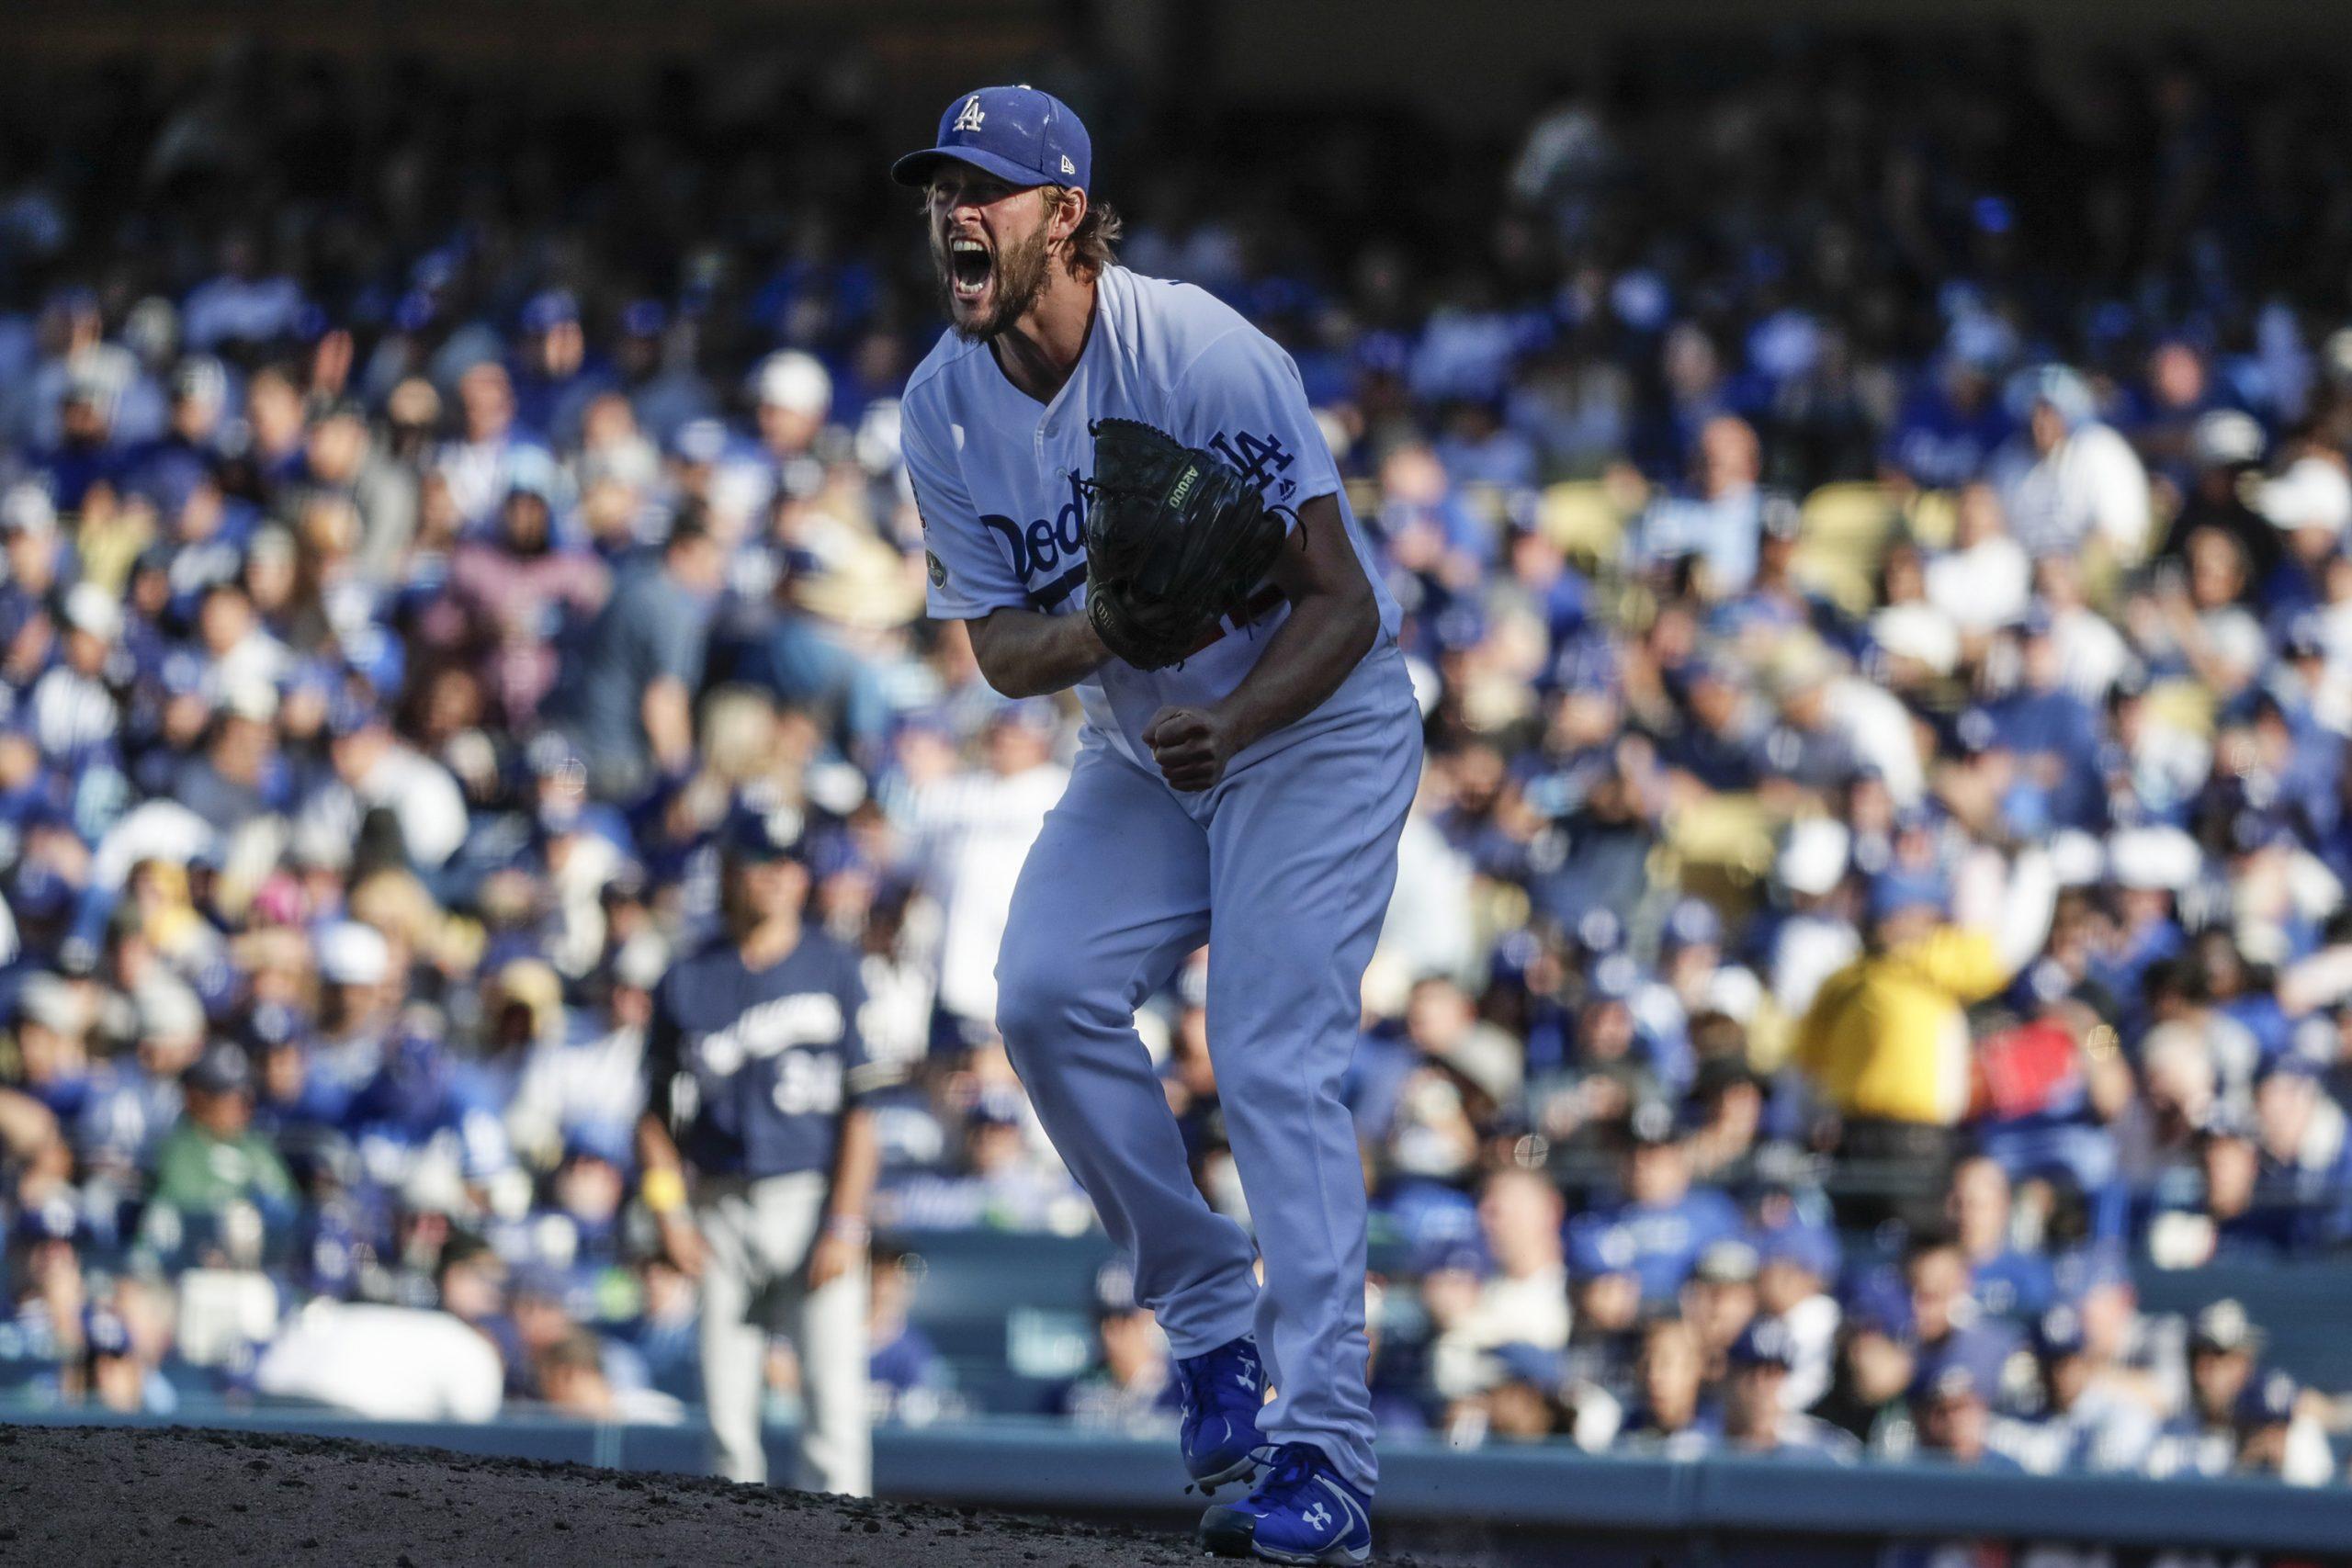 Los Angeles Dodgers pitcher Clayton Kershaw lets his emotion show while pitching against the Milwaukee Brewers in the sixth inning during Game 5 of the National League Championship Series at Dodger Stadium in Los Angeles on Wednesday, Oct. 17, 2018. The Dodgers won, 5-2, for a 3-2 series lead. (Robert Gauthier/Los Angeles Times/TNS)